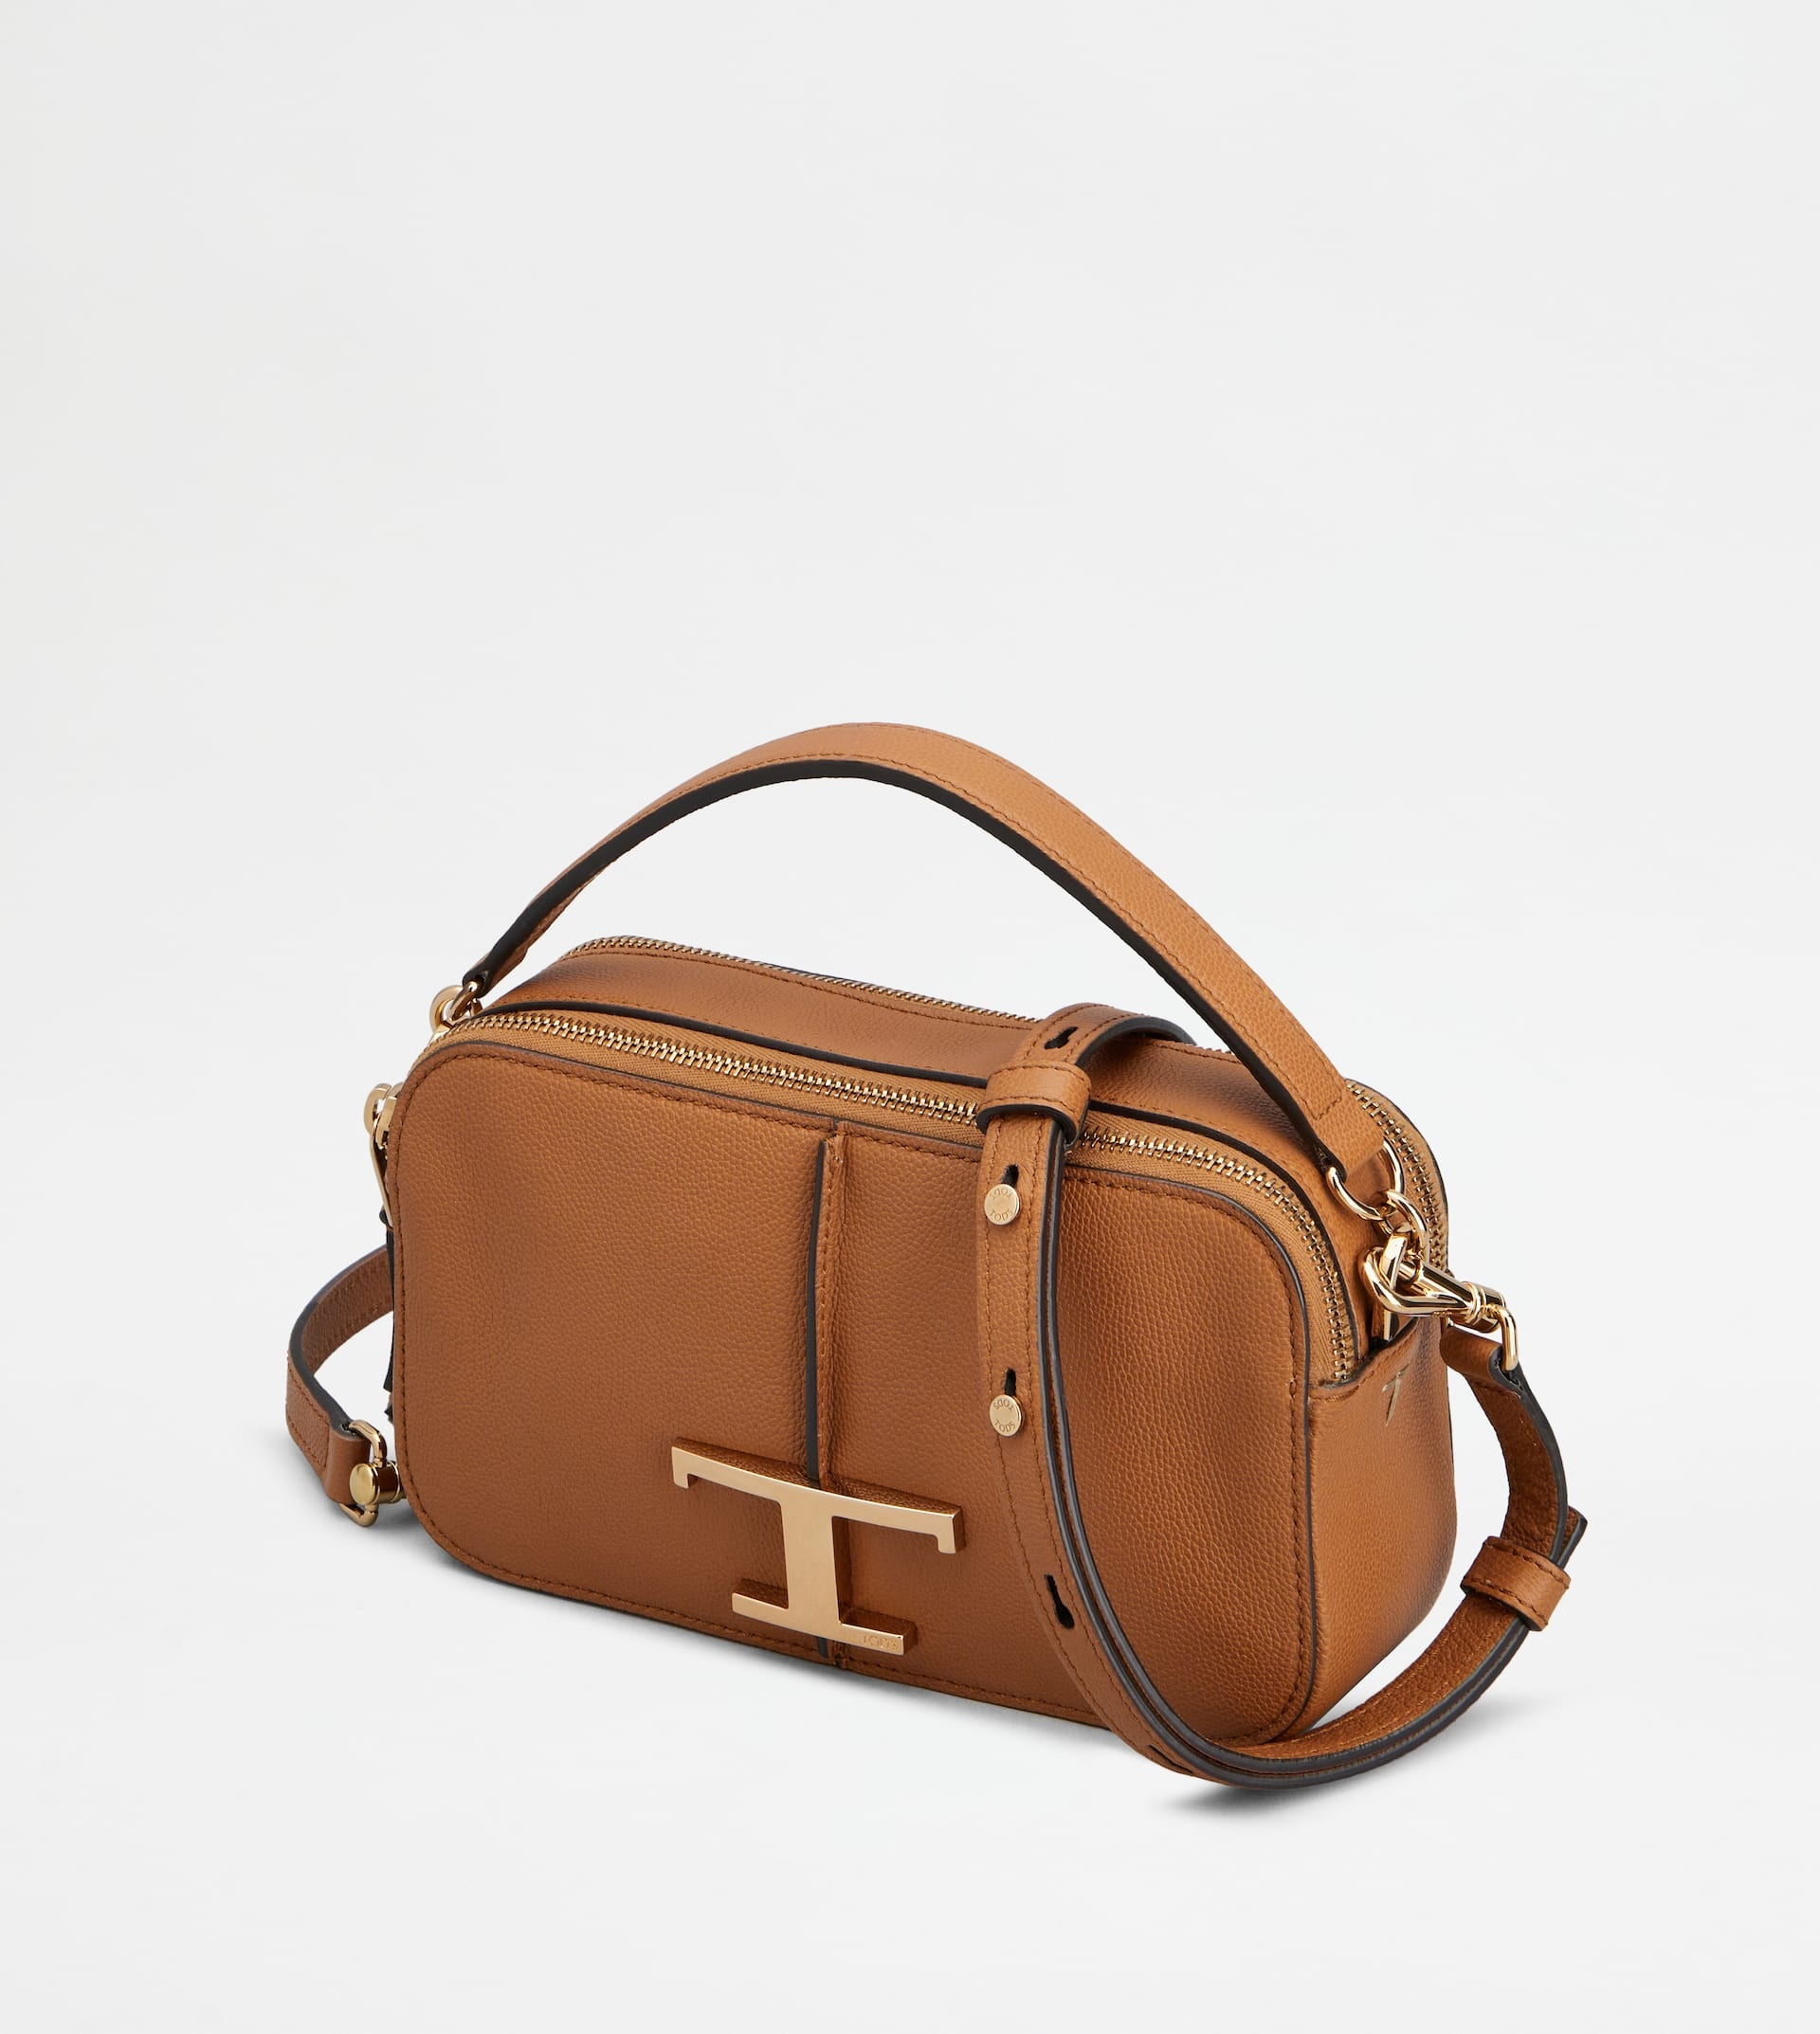 T TIMELESS CAMERA BAG IN LEATHER MINI - BROWN - 6